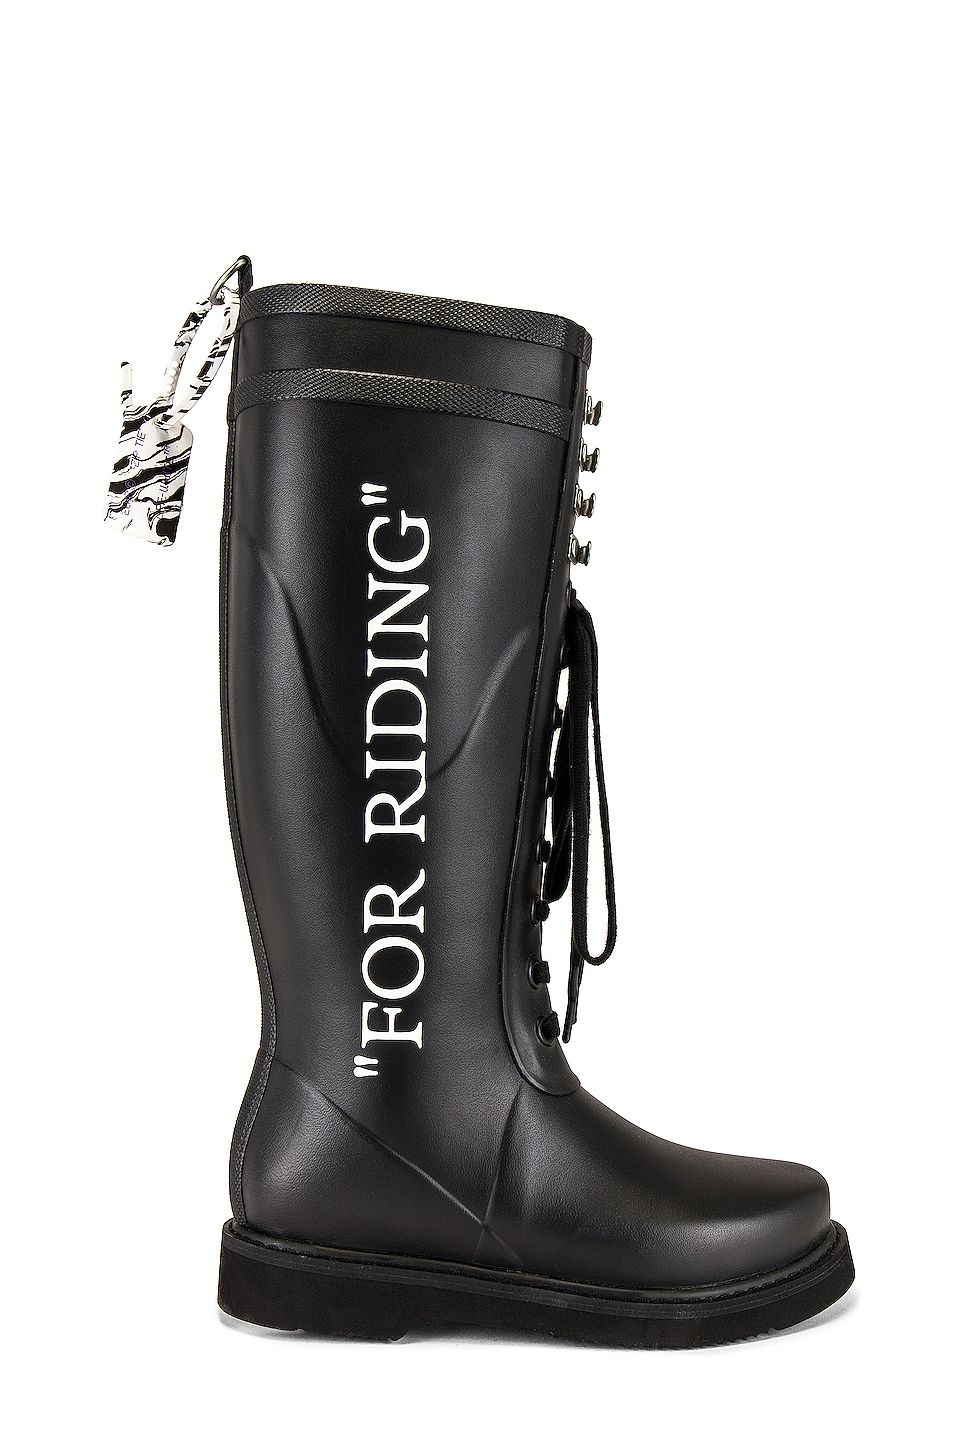 For Riding Wellington Boot